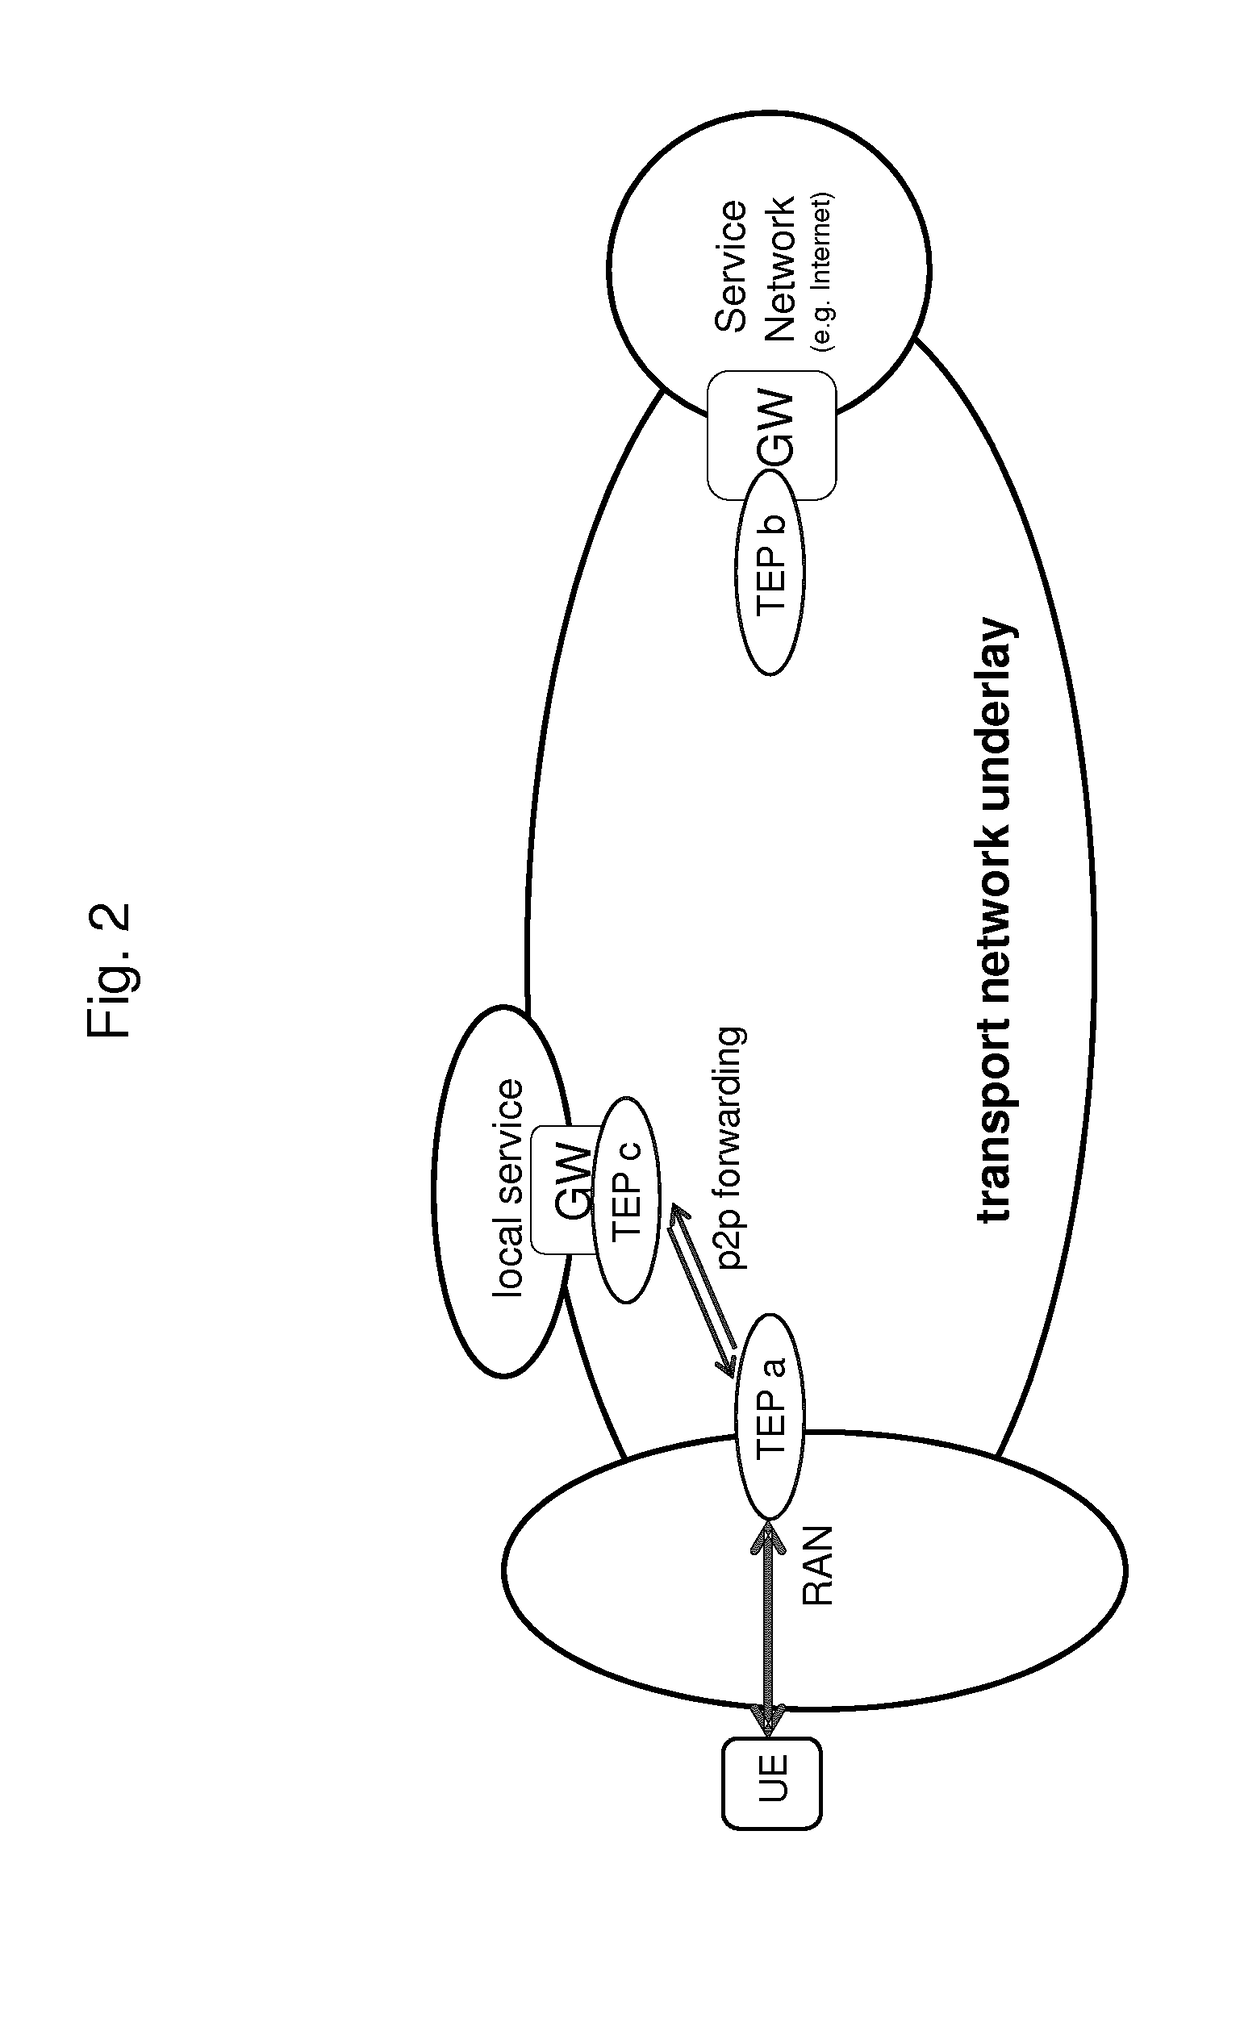 Integrated services processing for mobile networks